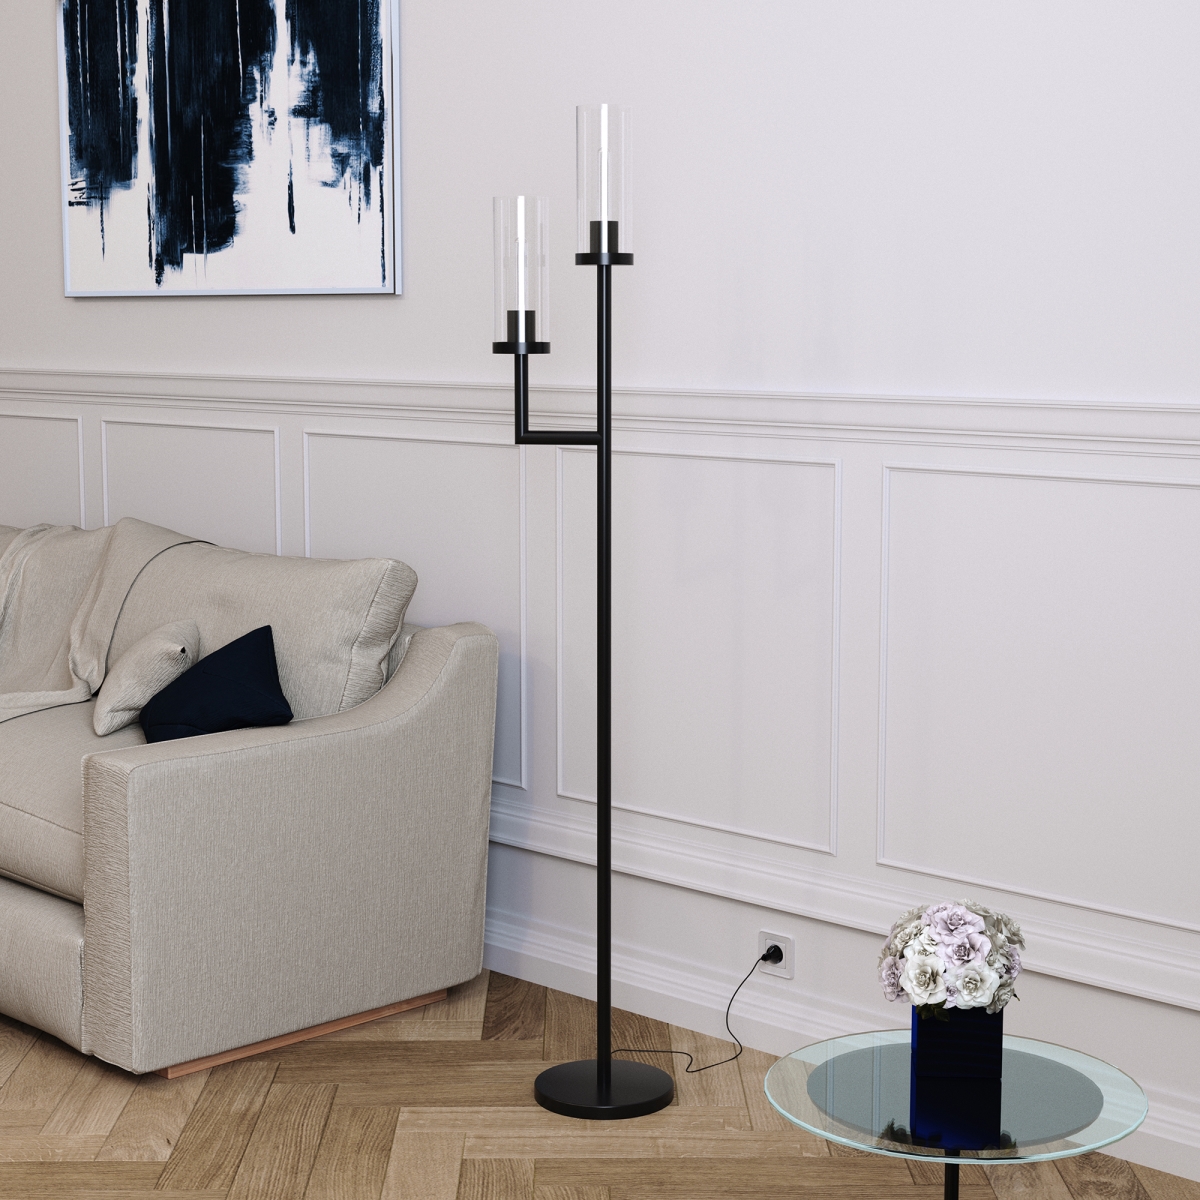 Picture of Henn & Hart FL0013 Basso Blackened Bronze 2-Light Torchiere Floor Lamp with Clear Glass Shades